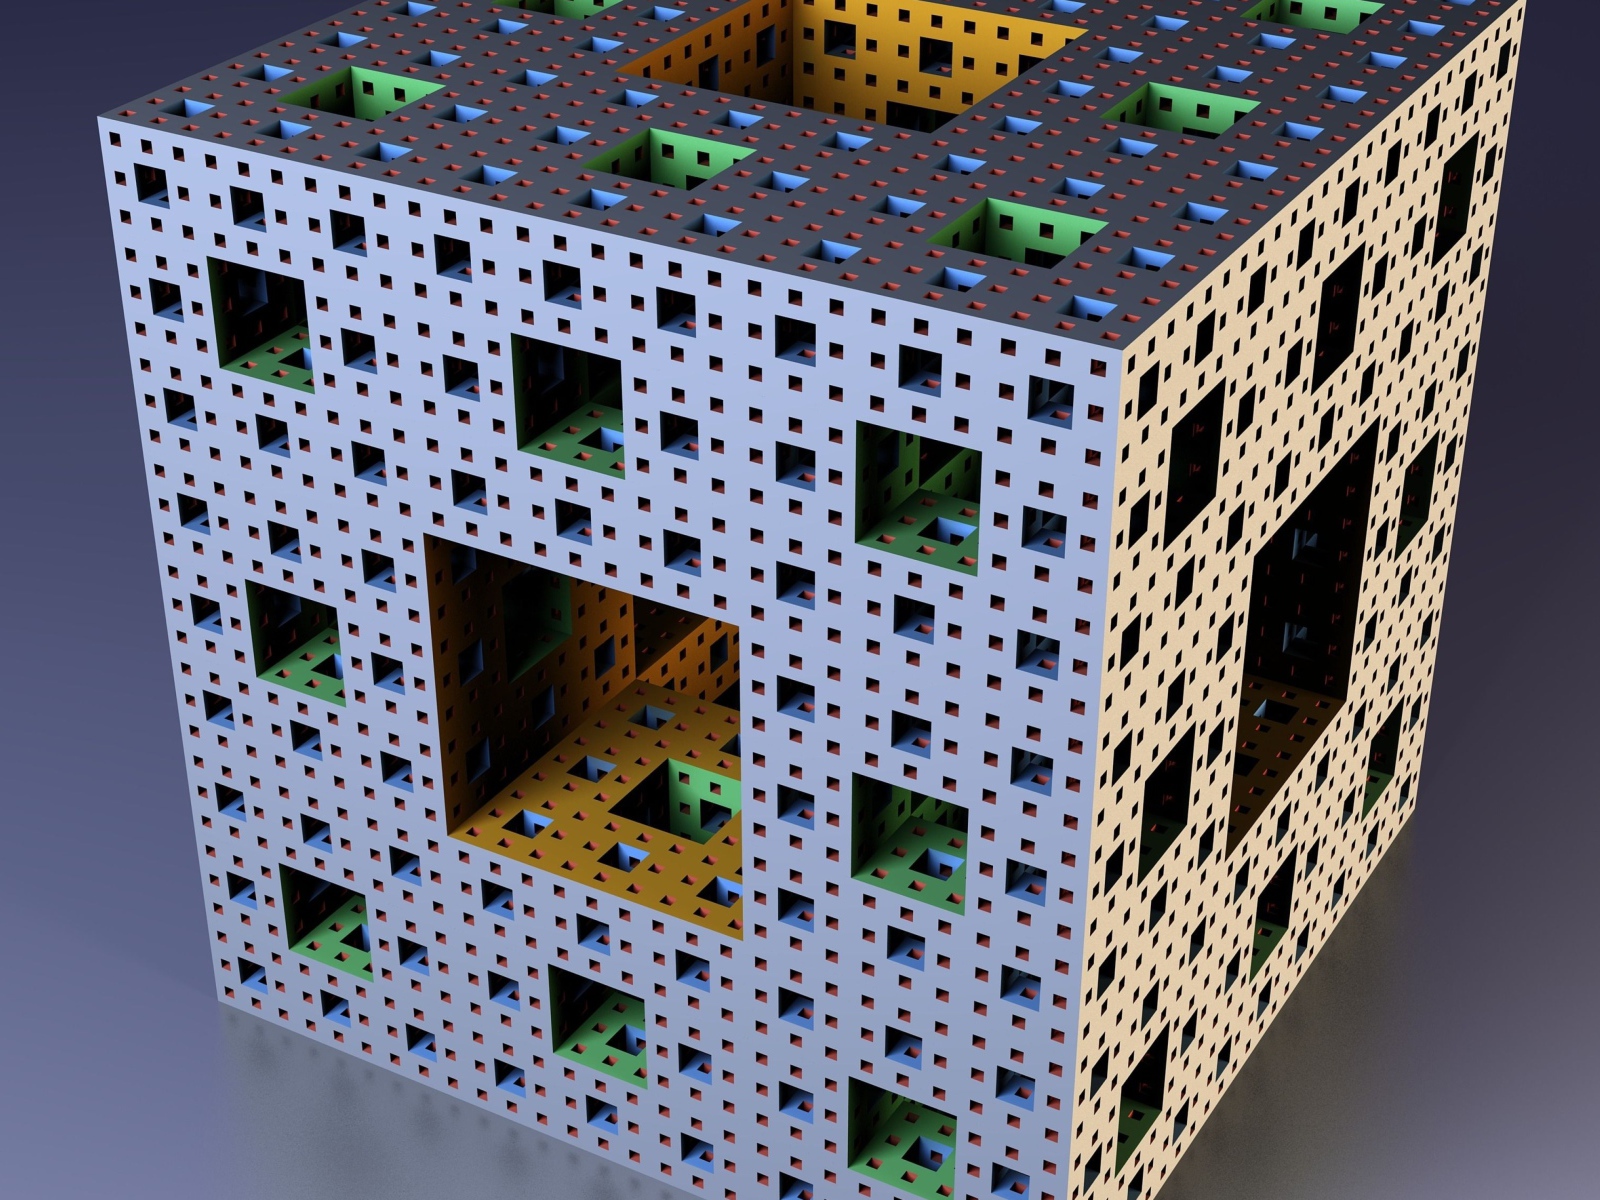 Large 3d cube on a gray background